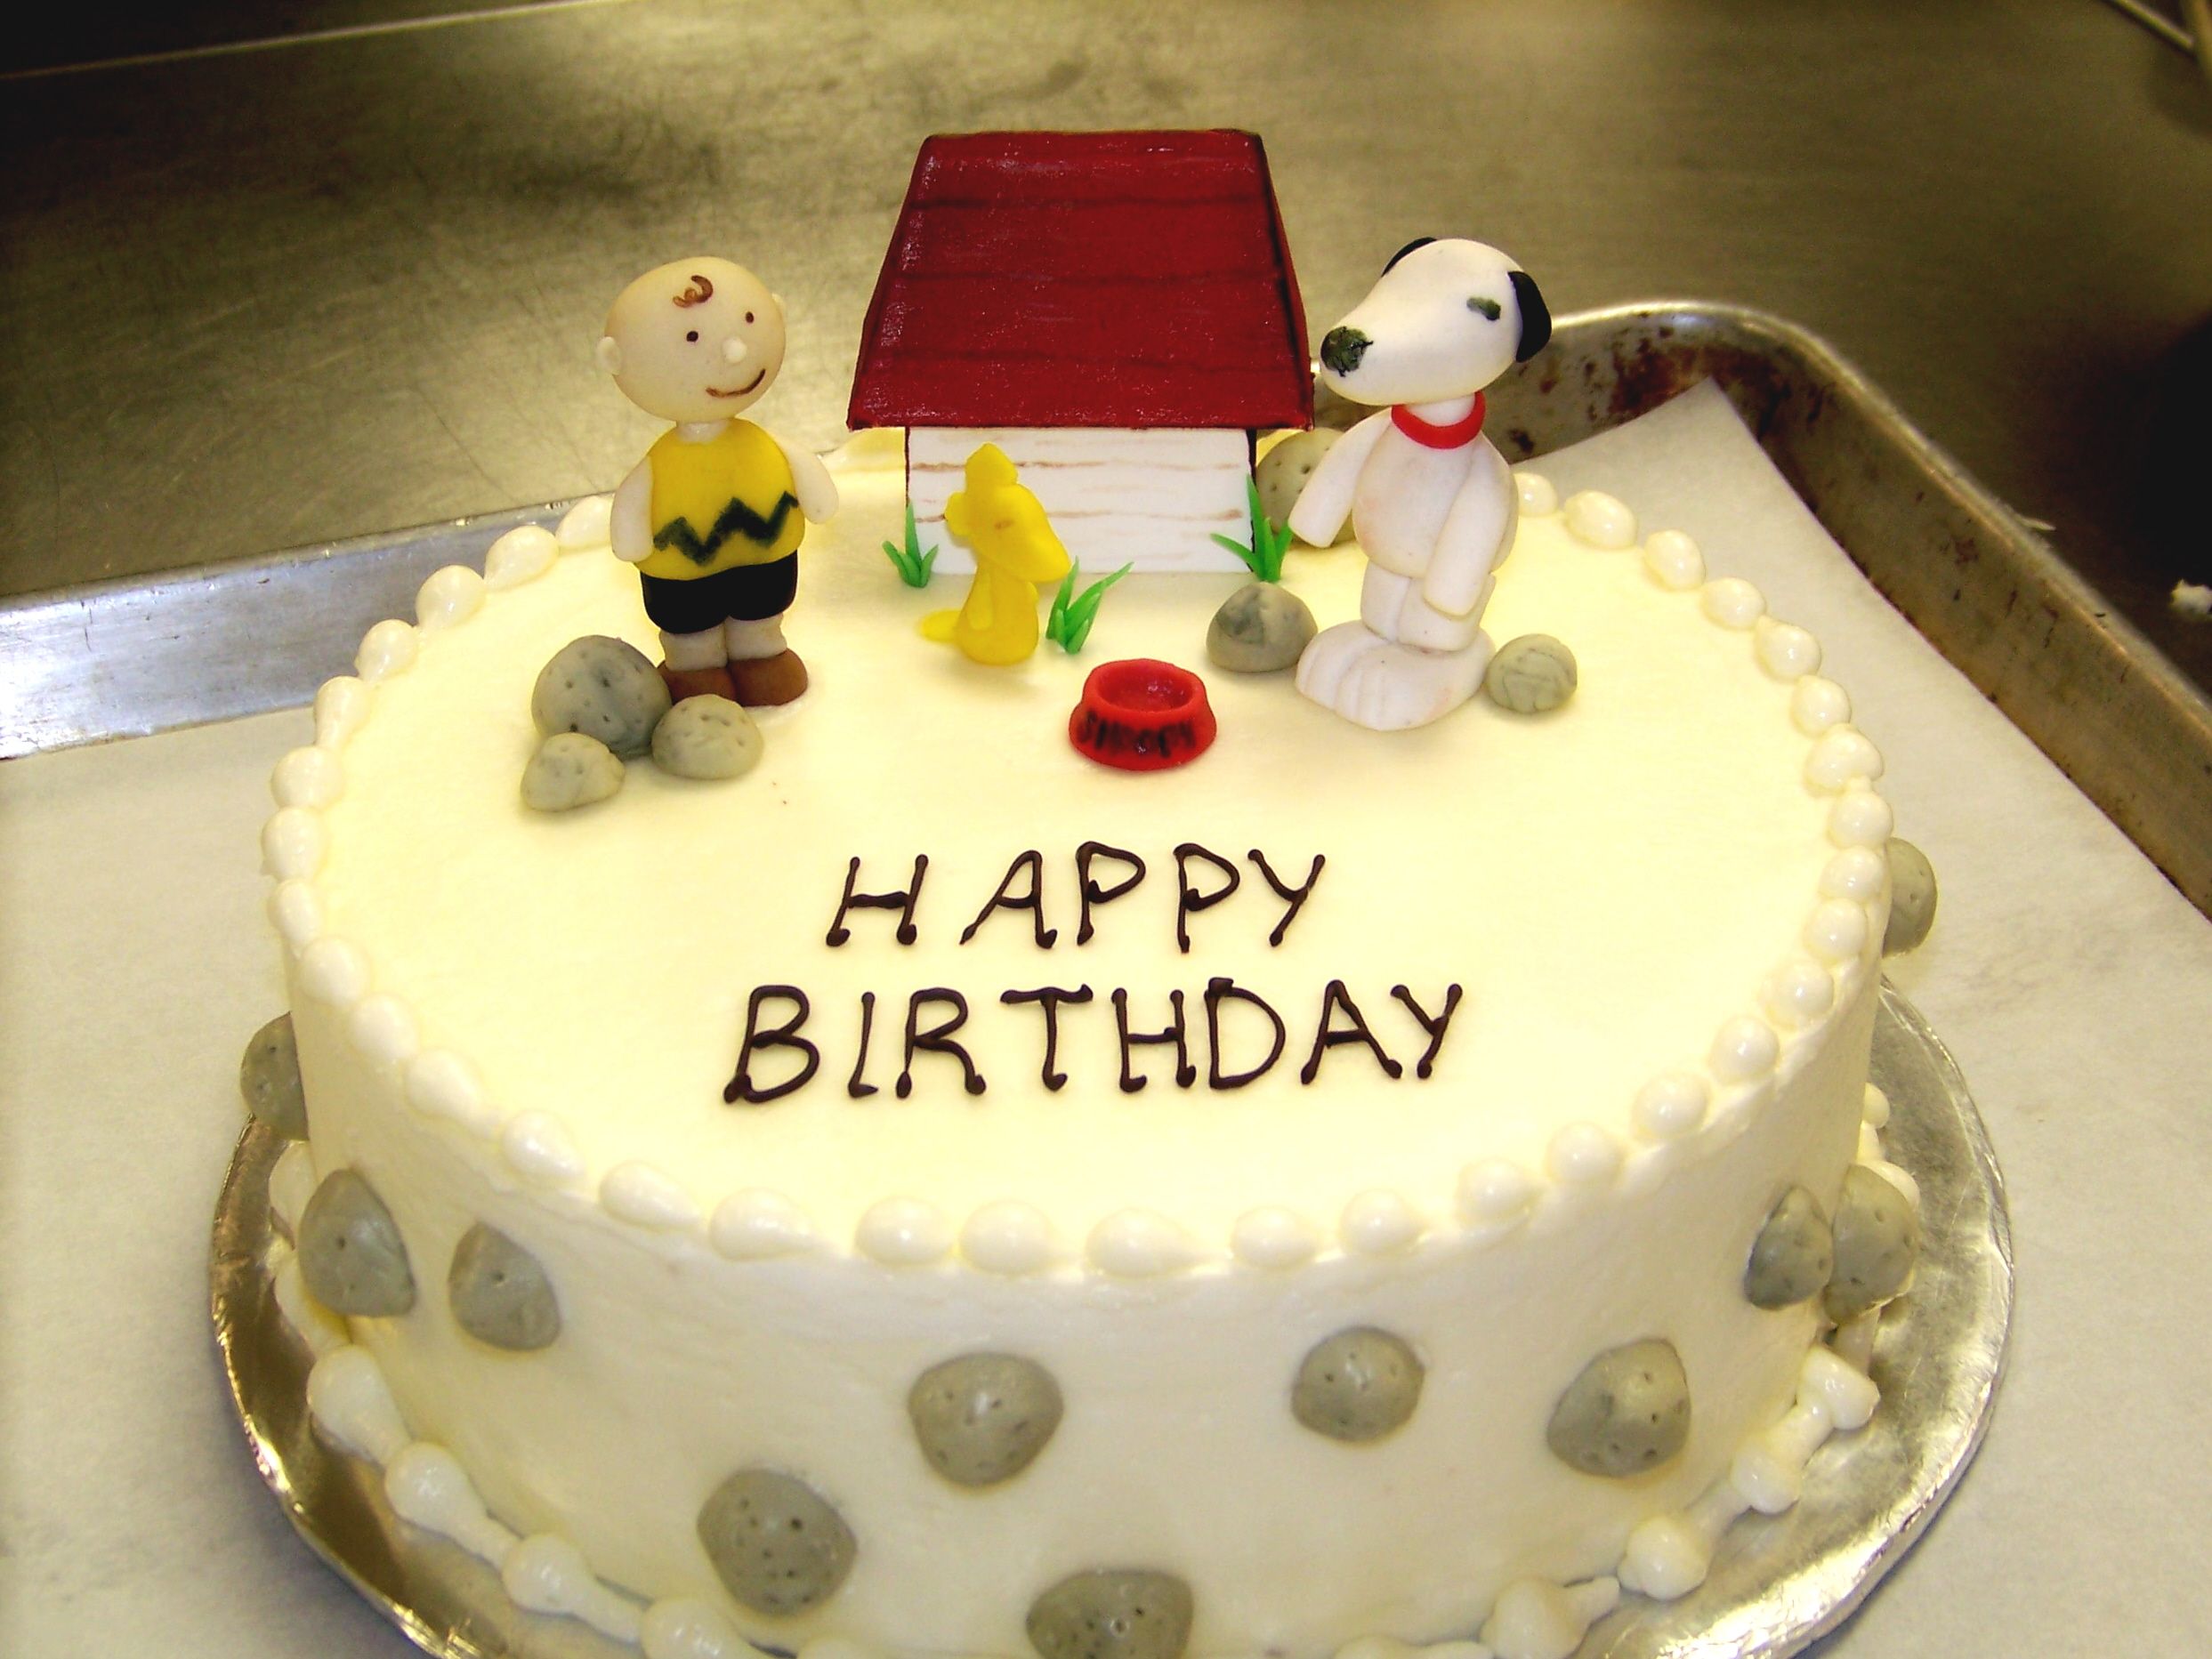 Happy Birthday Cakes | Happy Birthday Images Pictures Wallpapers ...